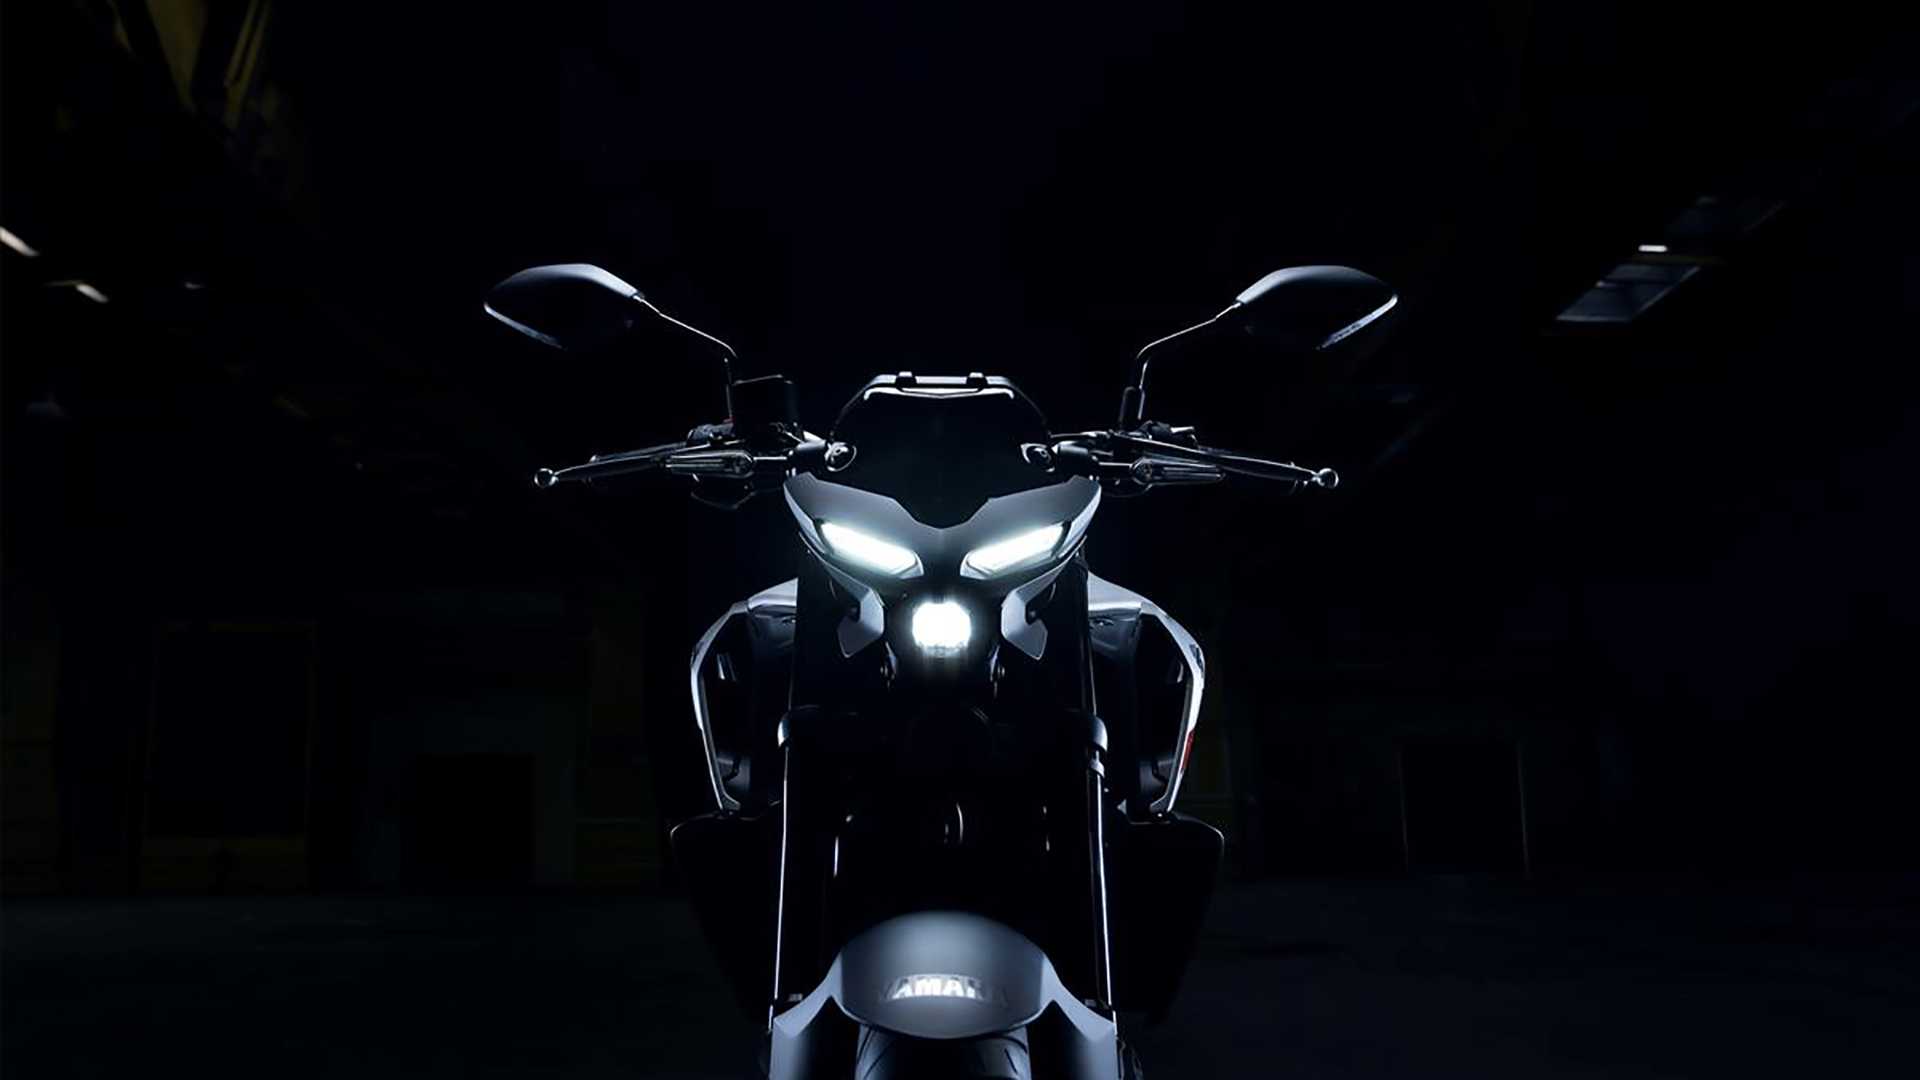 New 2020 Yamaha MT 03 Unveiled And Coming Stateside